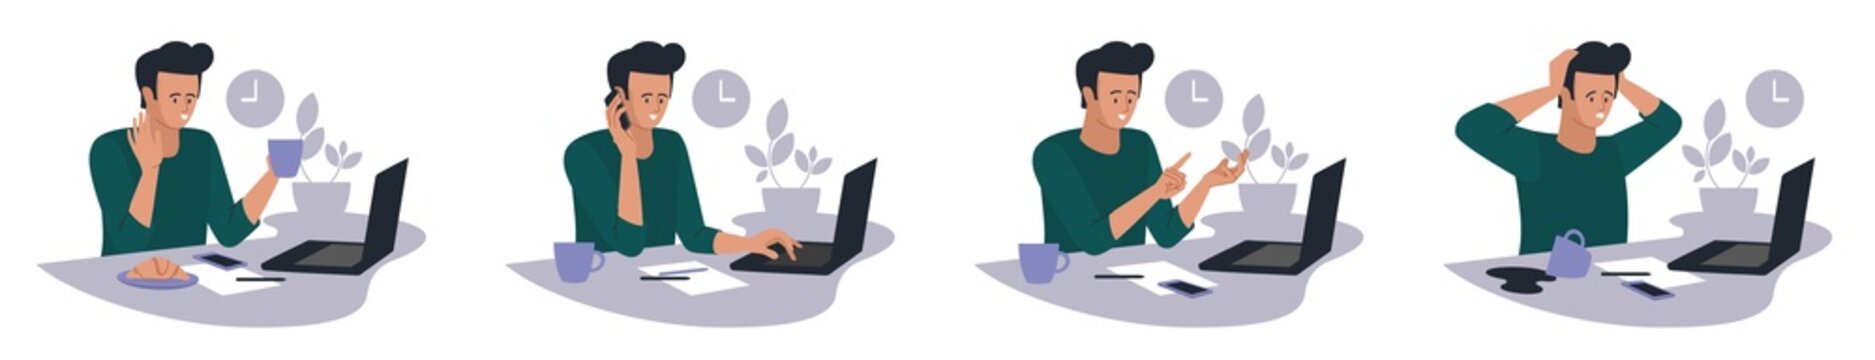 Online work. A man with a laptop. People and business. The working process. Infographics, presentation. Freelancer, work from home. Vector image.